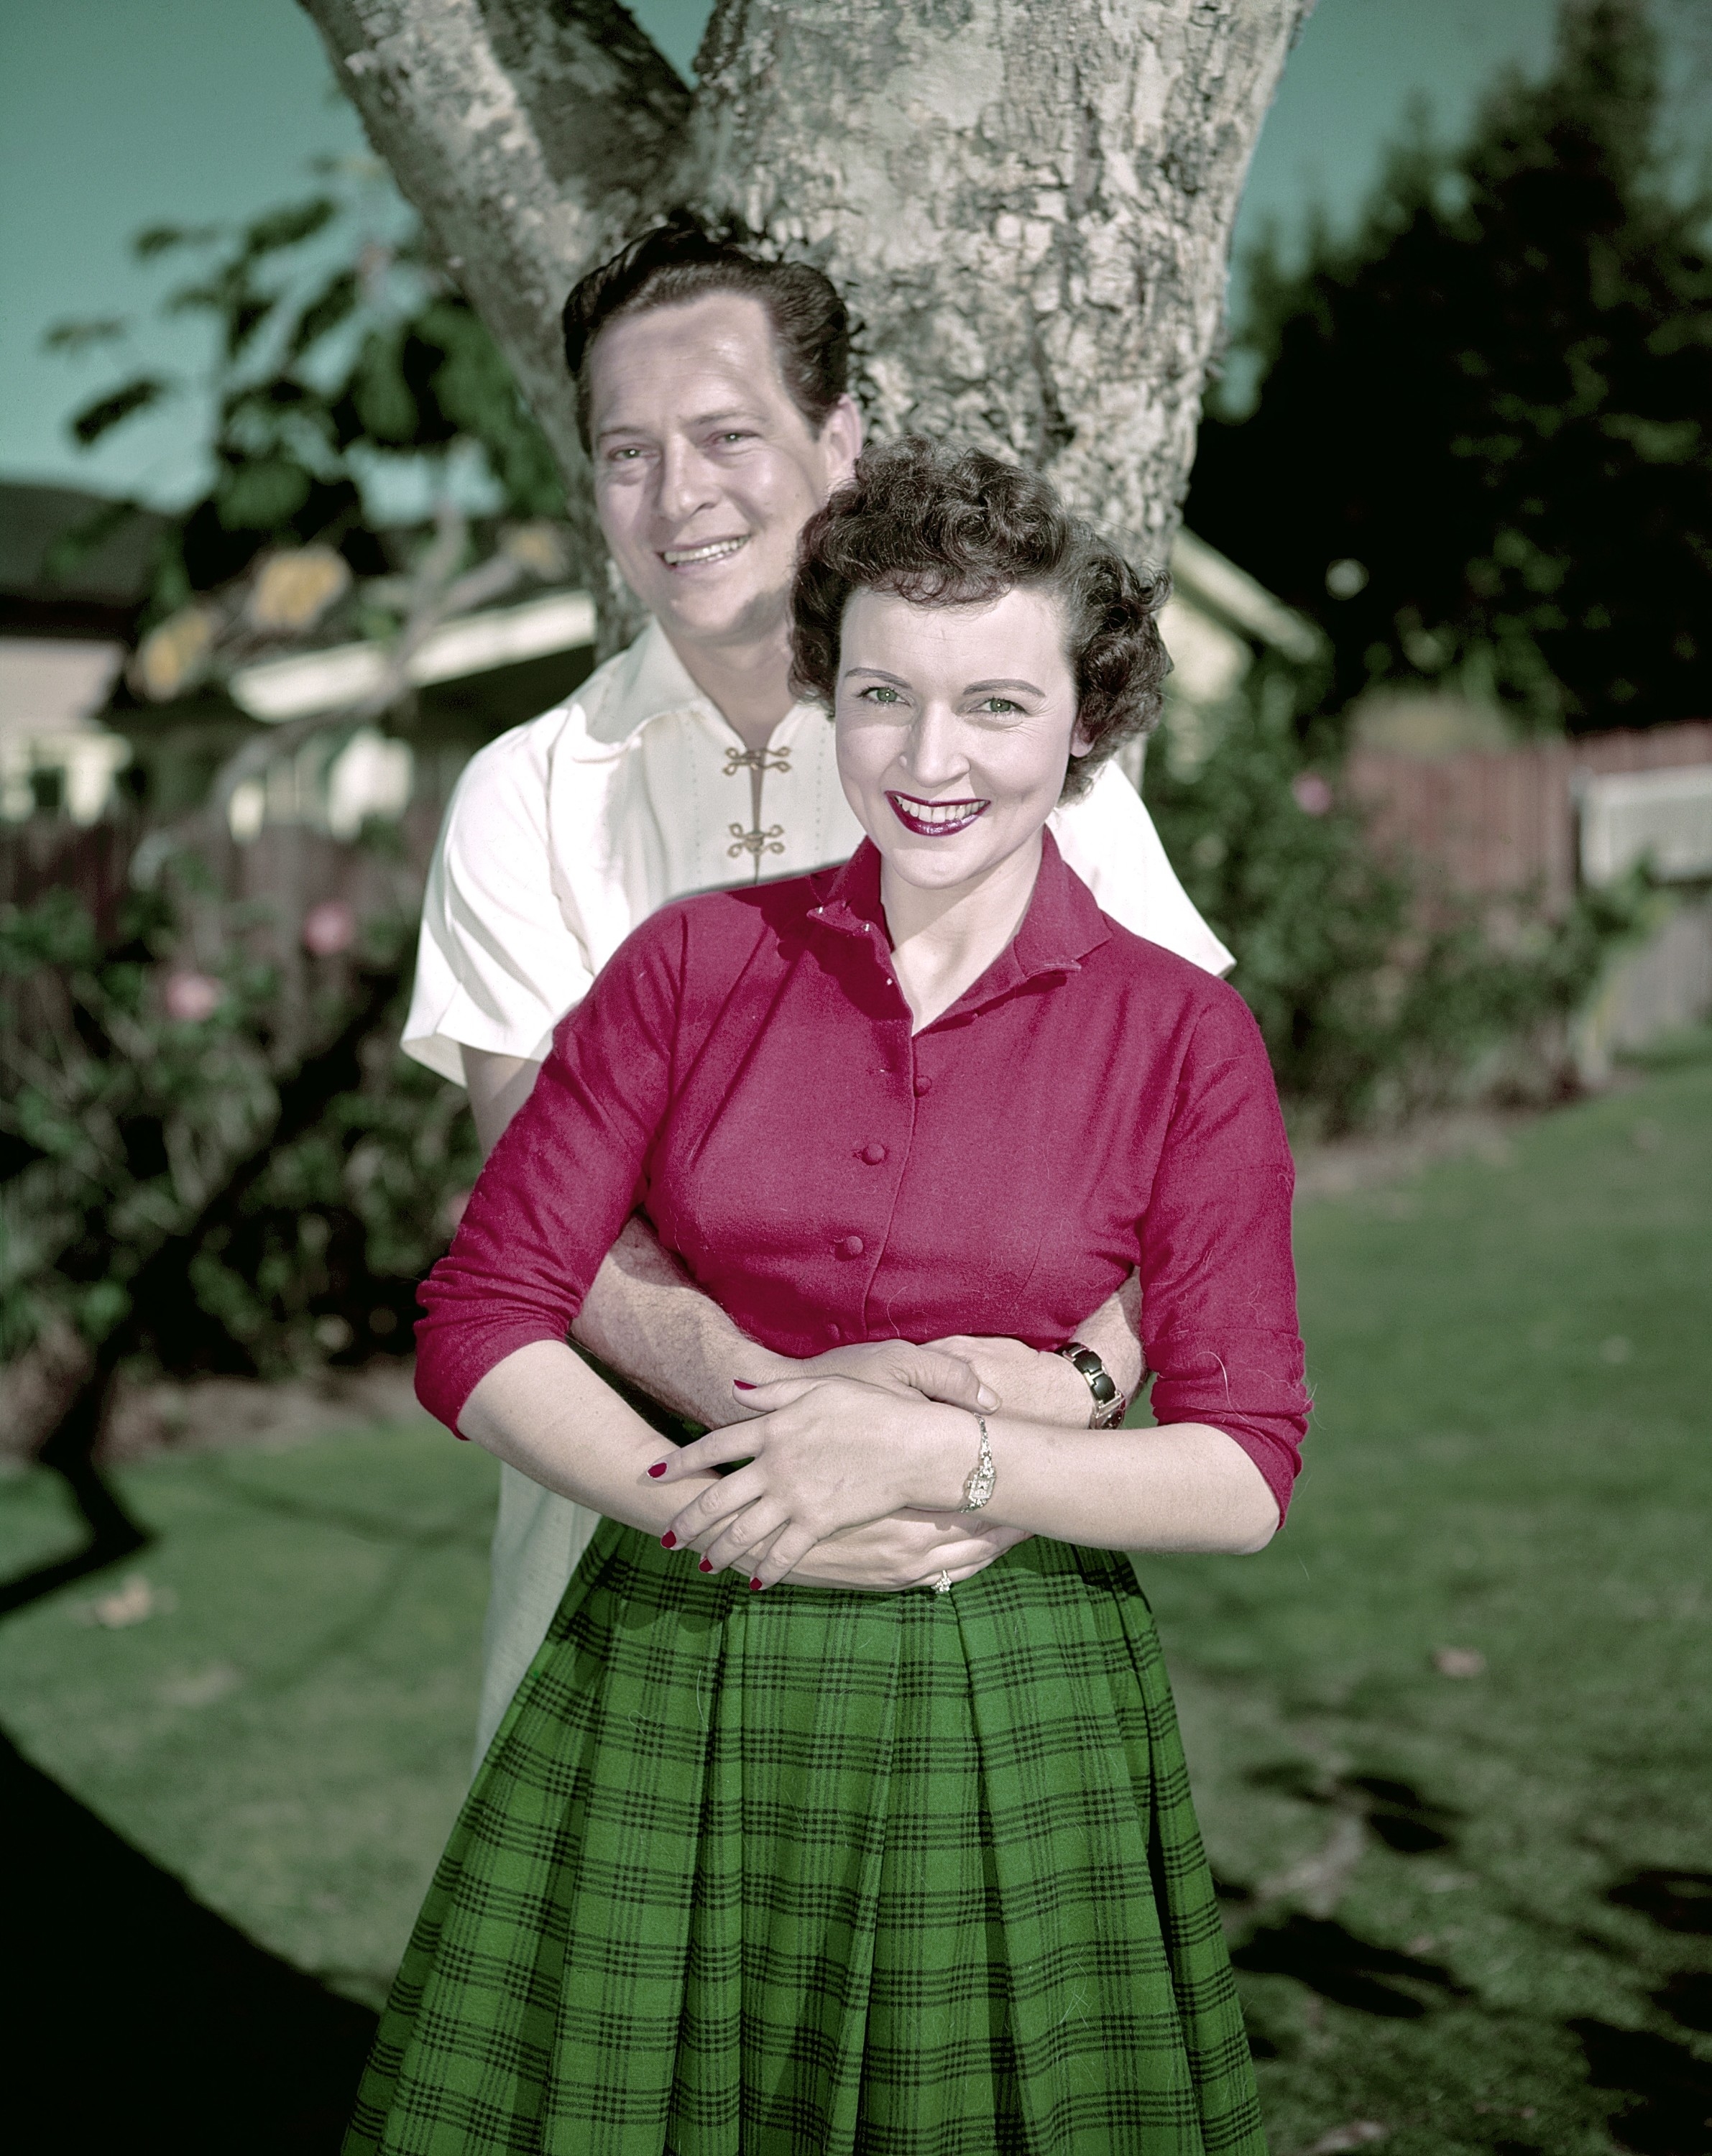 Betty White stands smiling in front of Allen Ludden, who is hugging her from behind near a tree in a garden